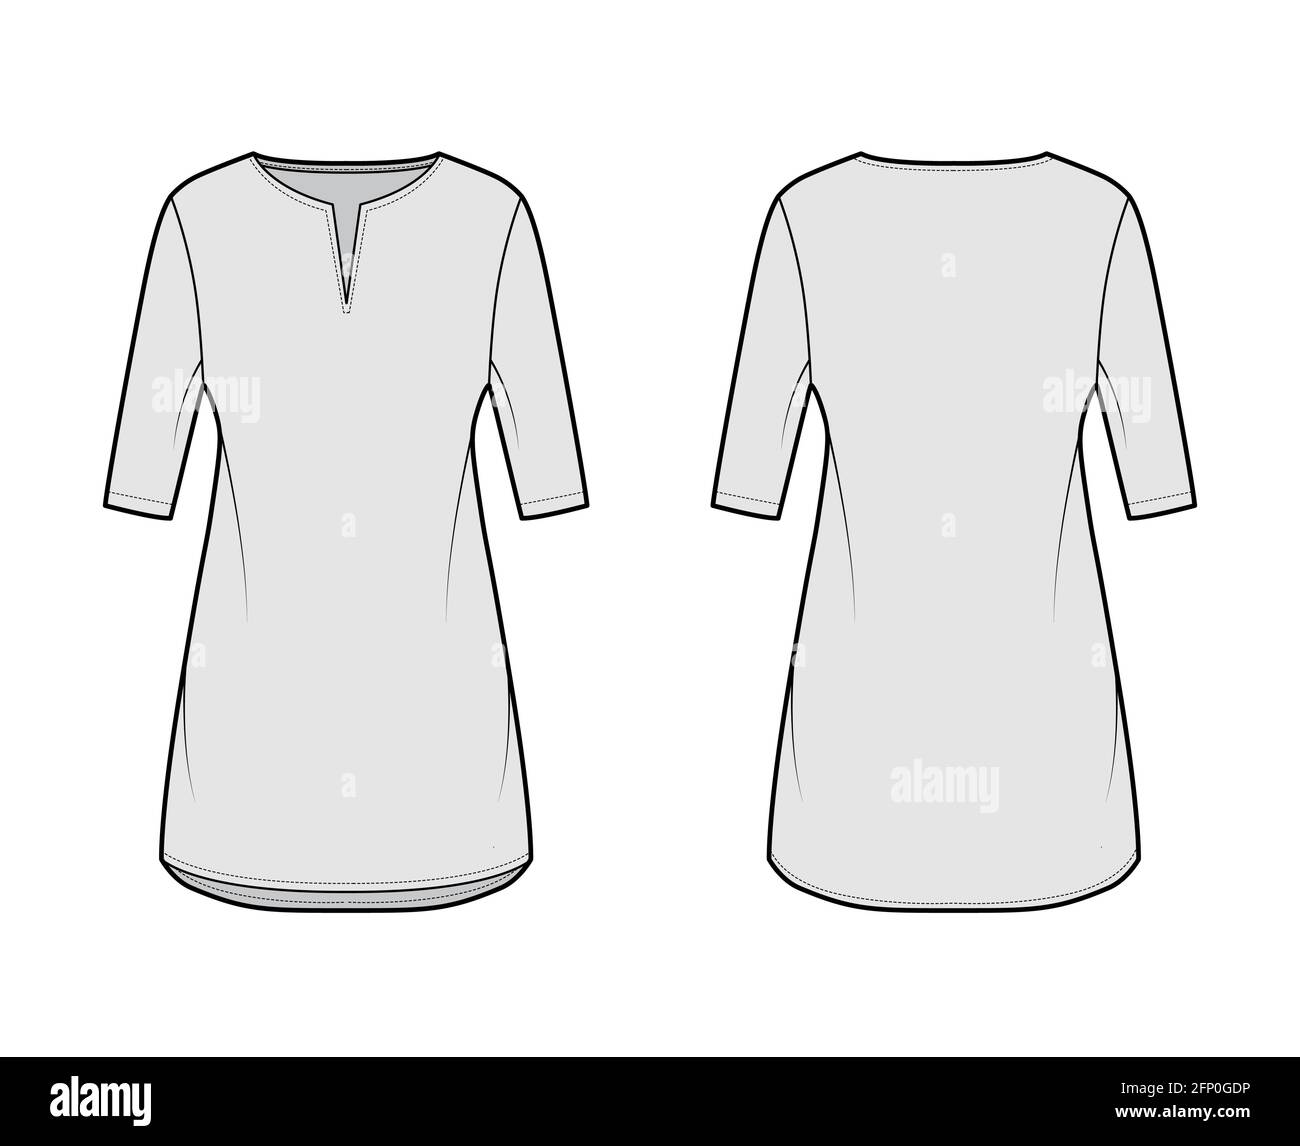 Dress tunic technical fashion illustration with elbow sleeves, oversized body, mini length skirt, slashed neck. Flat apparel front, back, grey color style. Women, men unisex CAD mockup Stock Vector